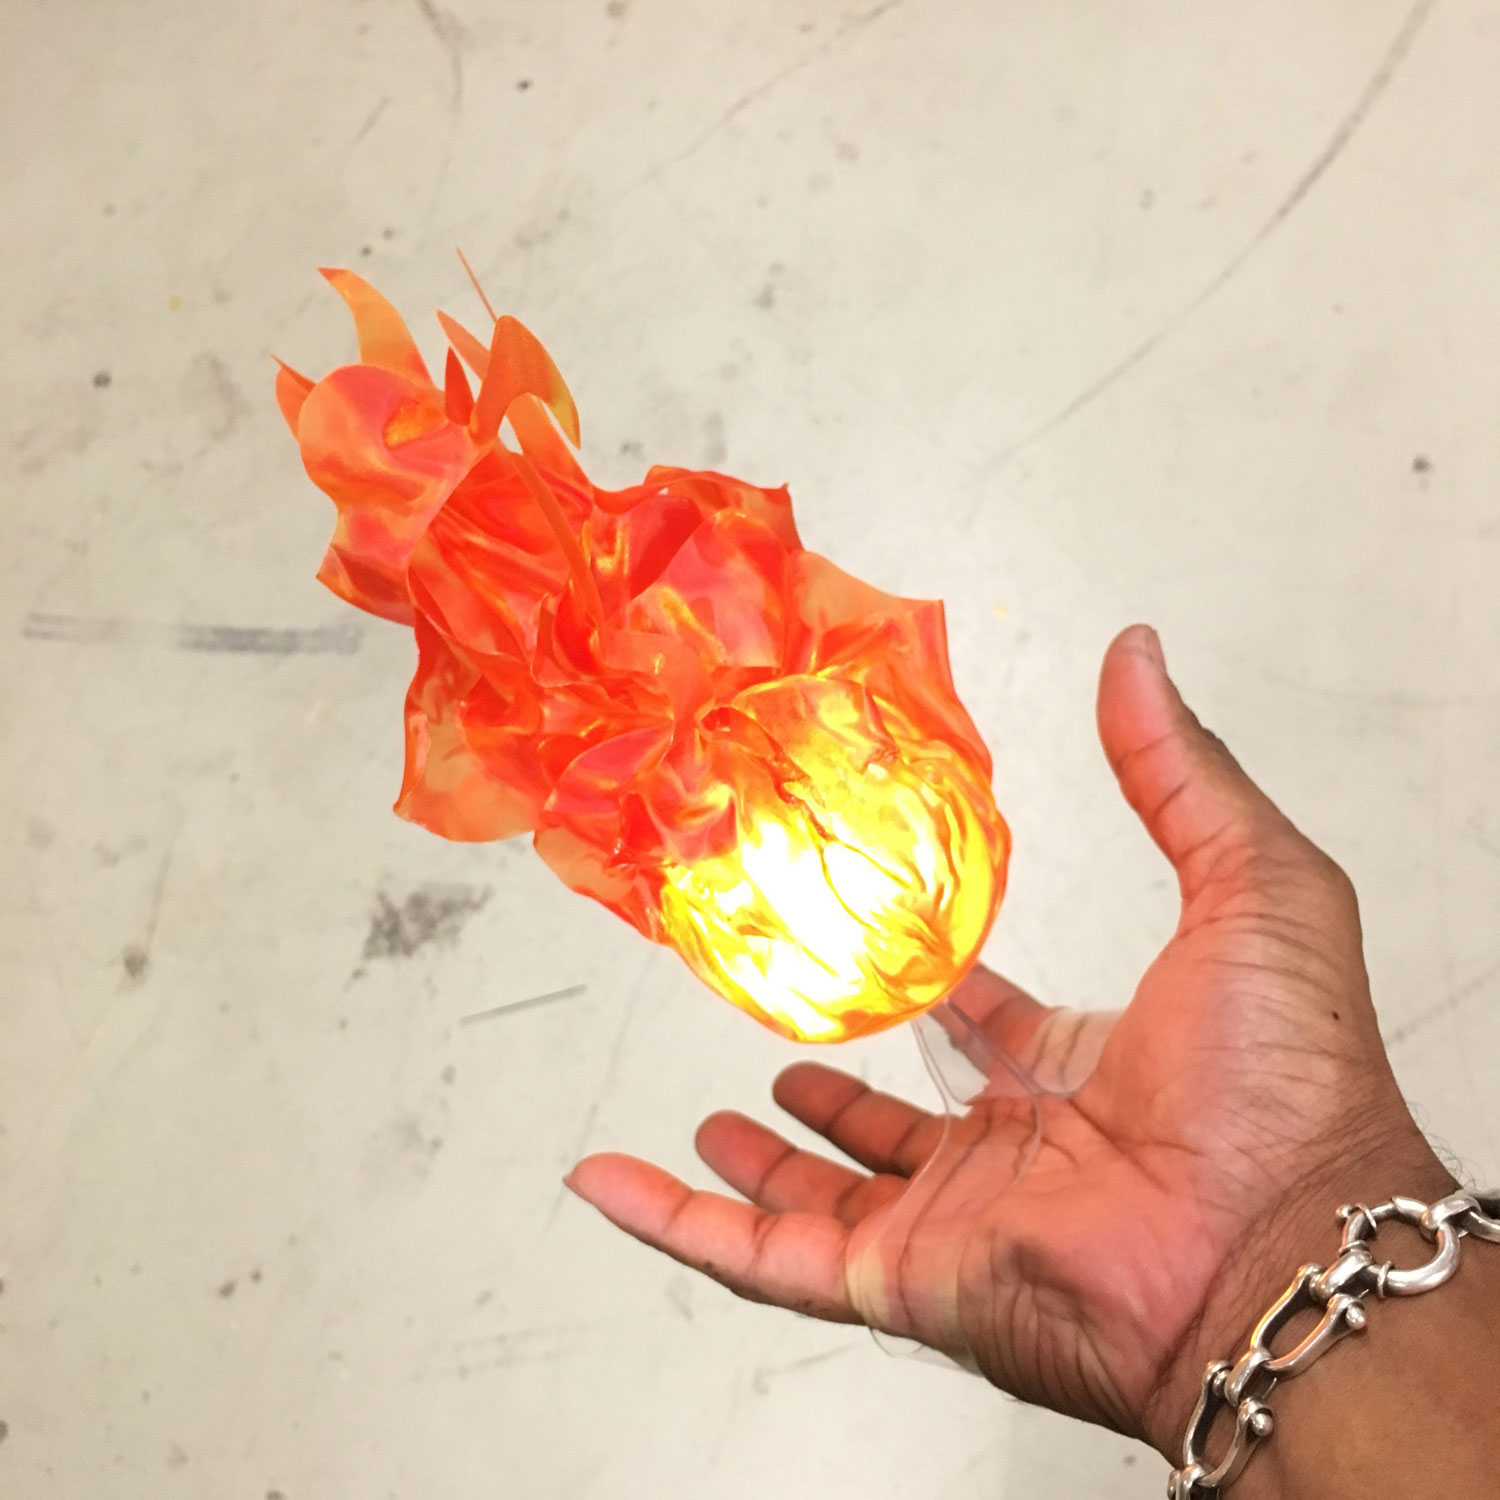 Fire Magic Flames Stage Illusions Comedy Halloween，Halloween Floating Fireball Prop Floating Fireball Prop 2.0 for Cosplay Convention Halloween Dress Up Props Cosplay Lights A 